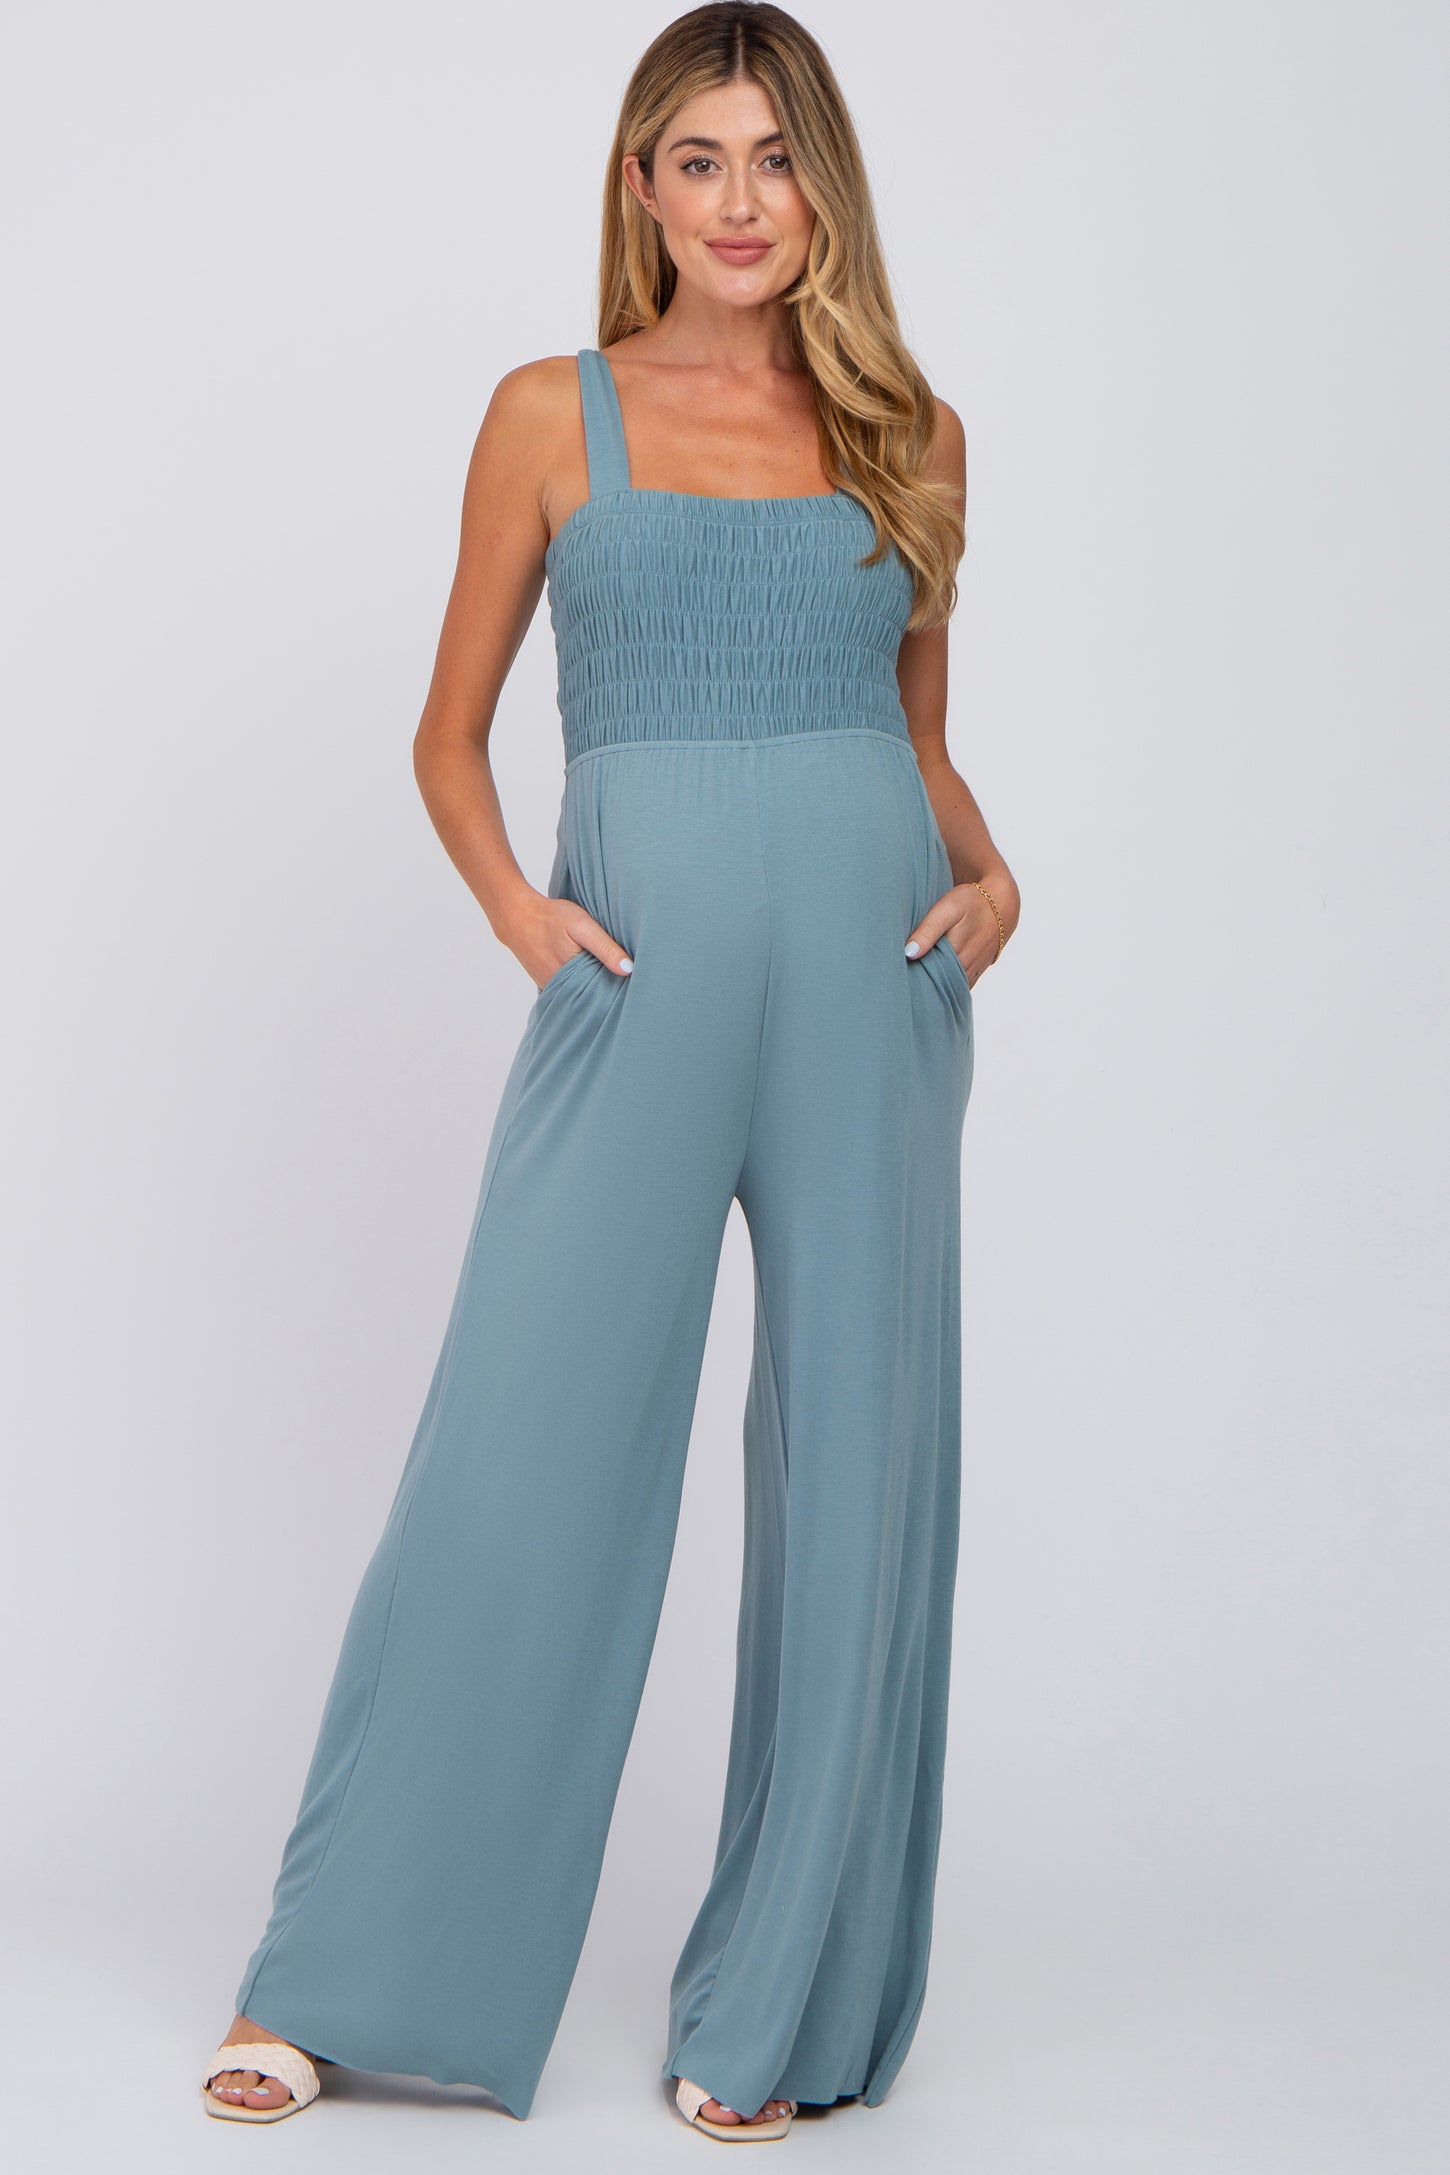 Milli jumpsuit in sky blue | Maternity dresses for baby shower, Baby shower  dresses, Cute maternity outfits